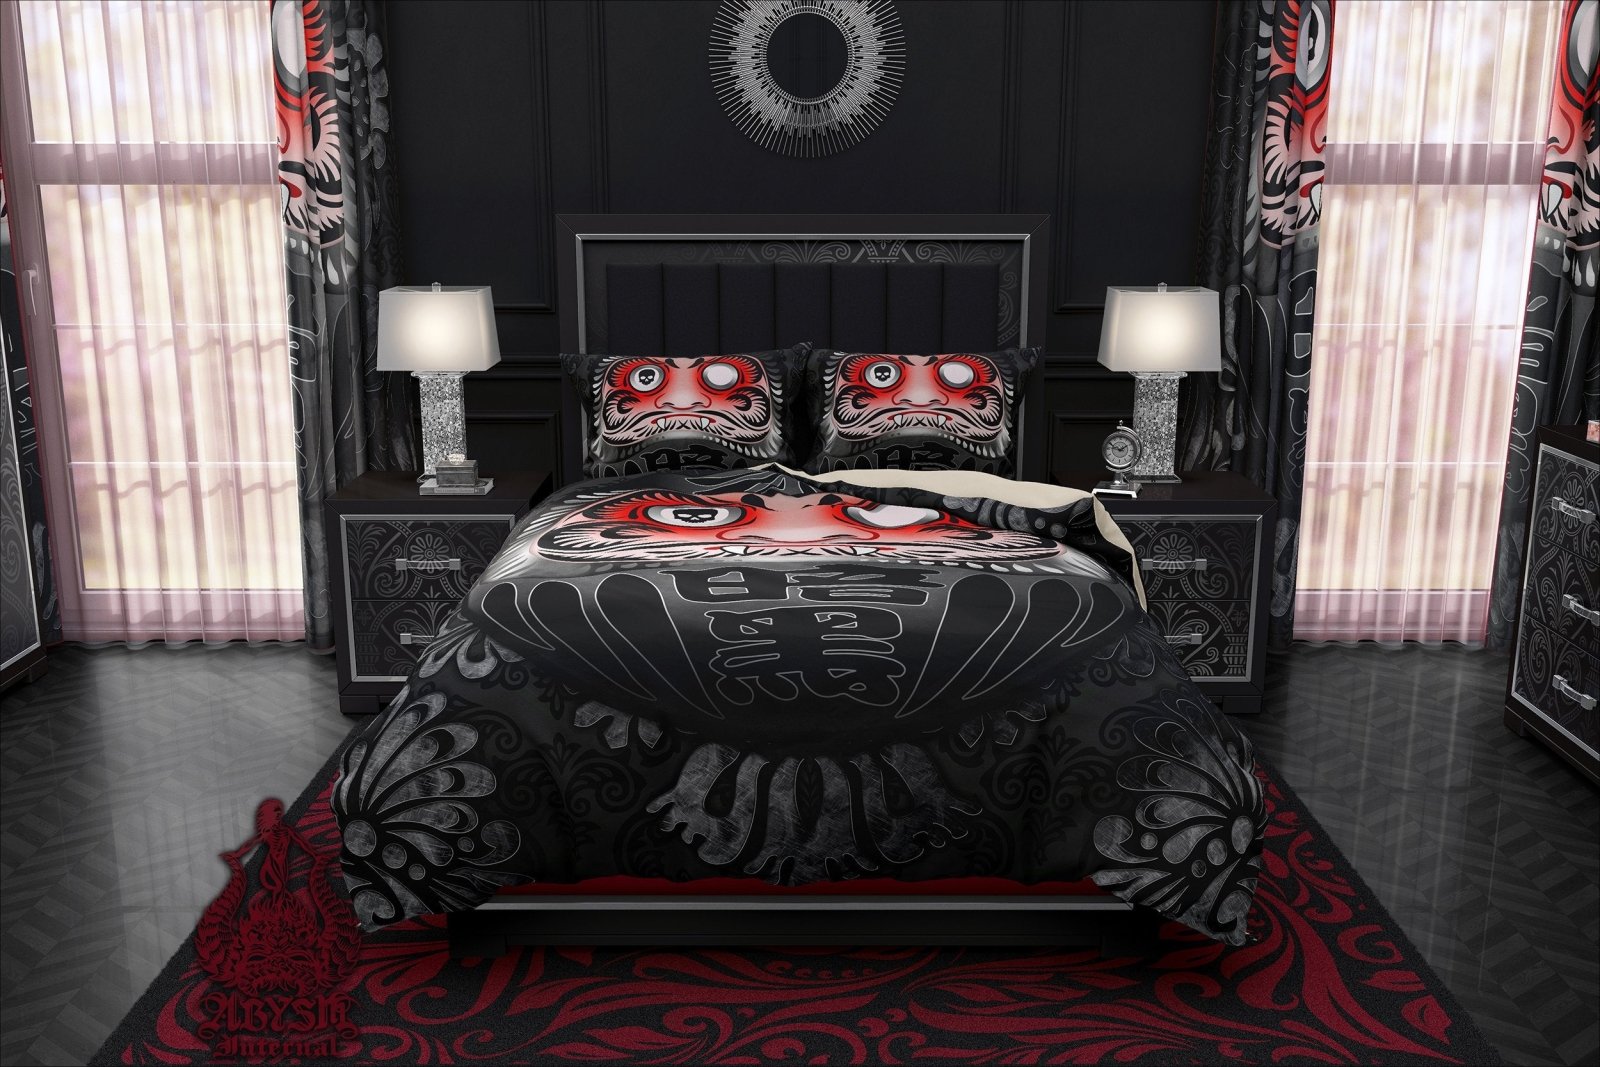 Black Daruma Bedding Set, Comforter and Duvet, Funny Goth Bed Cover and Bedroom Decor, King, Queen and Twin Size - Japanese Art - Abysm Internal